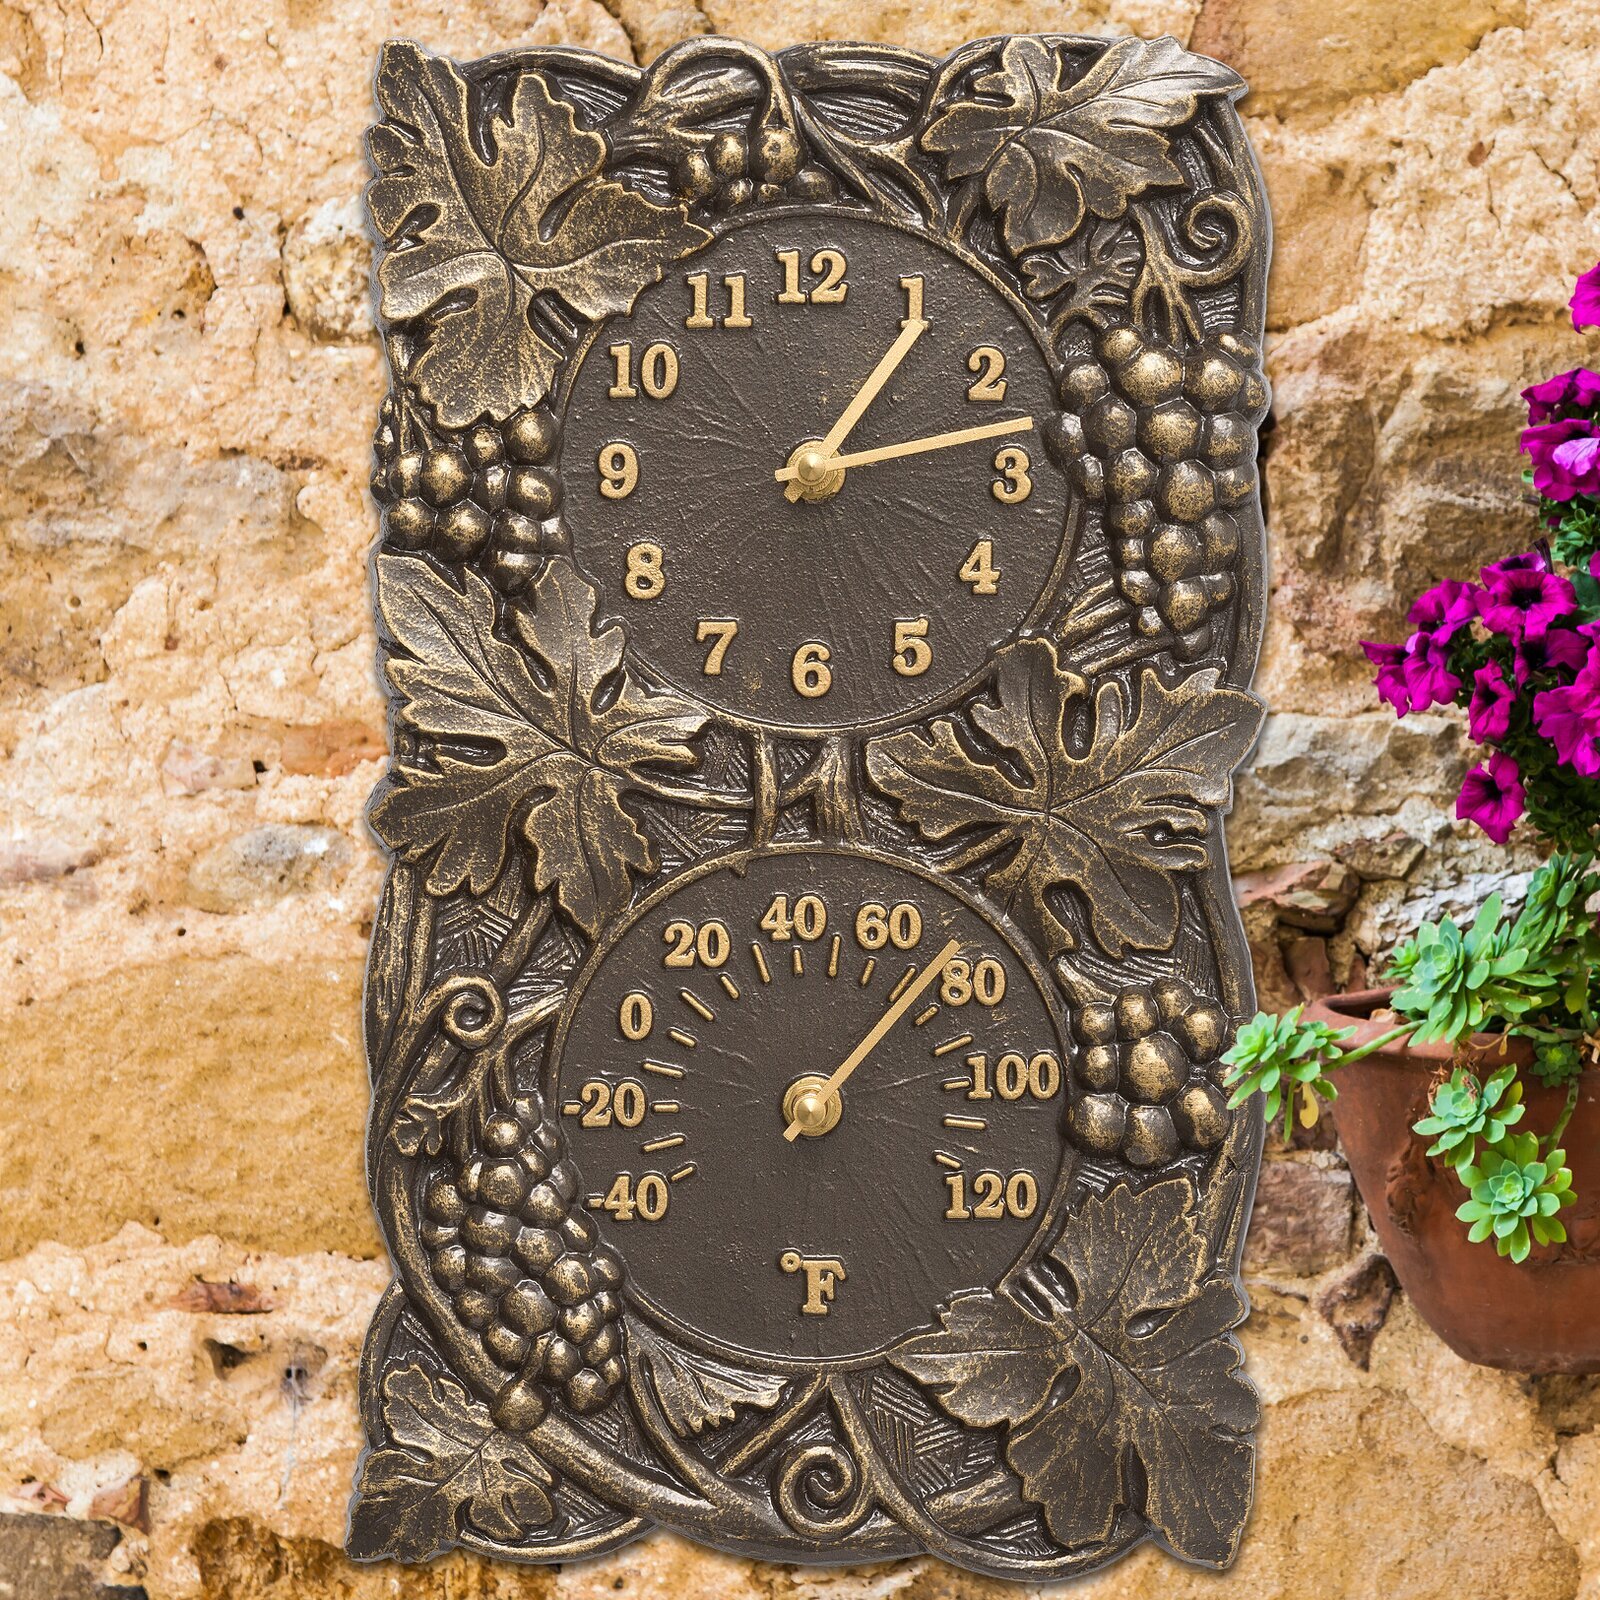 Extra large, themed, bronze outdoor wall thermometer 